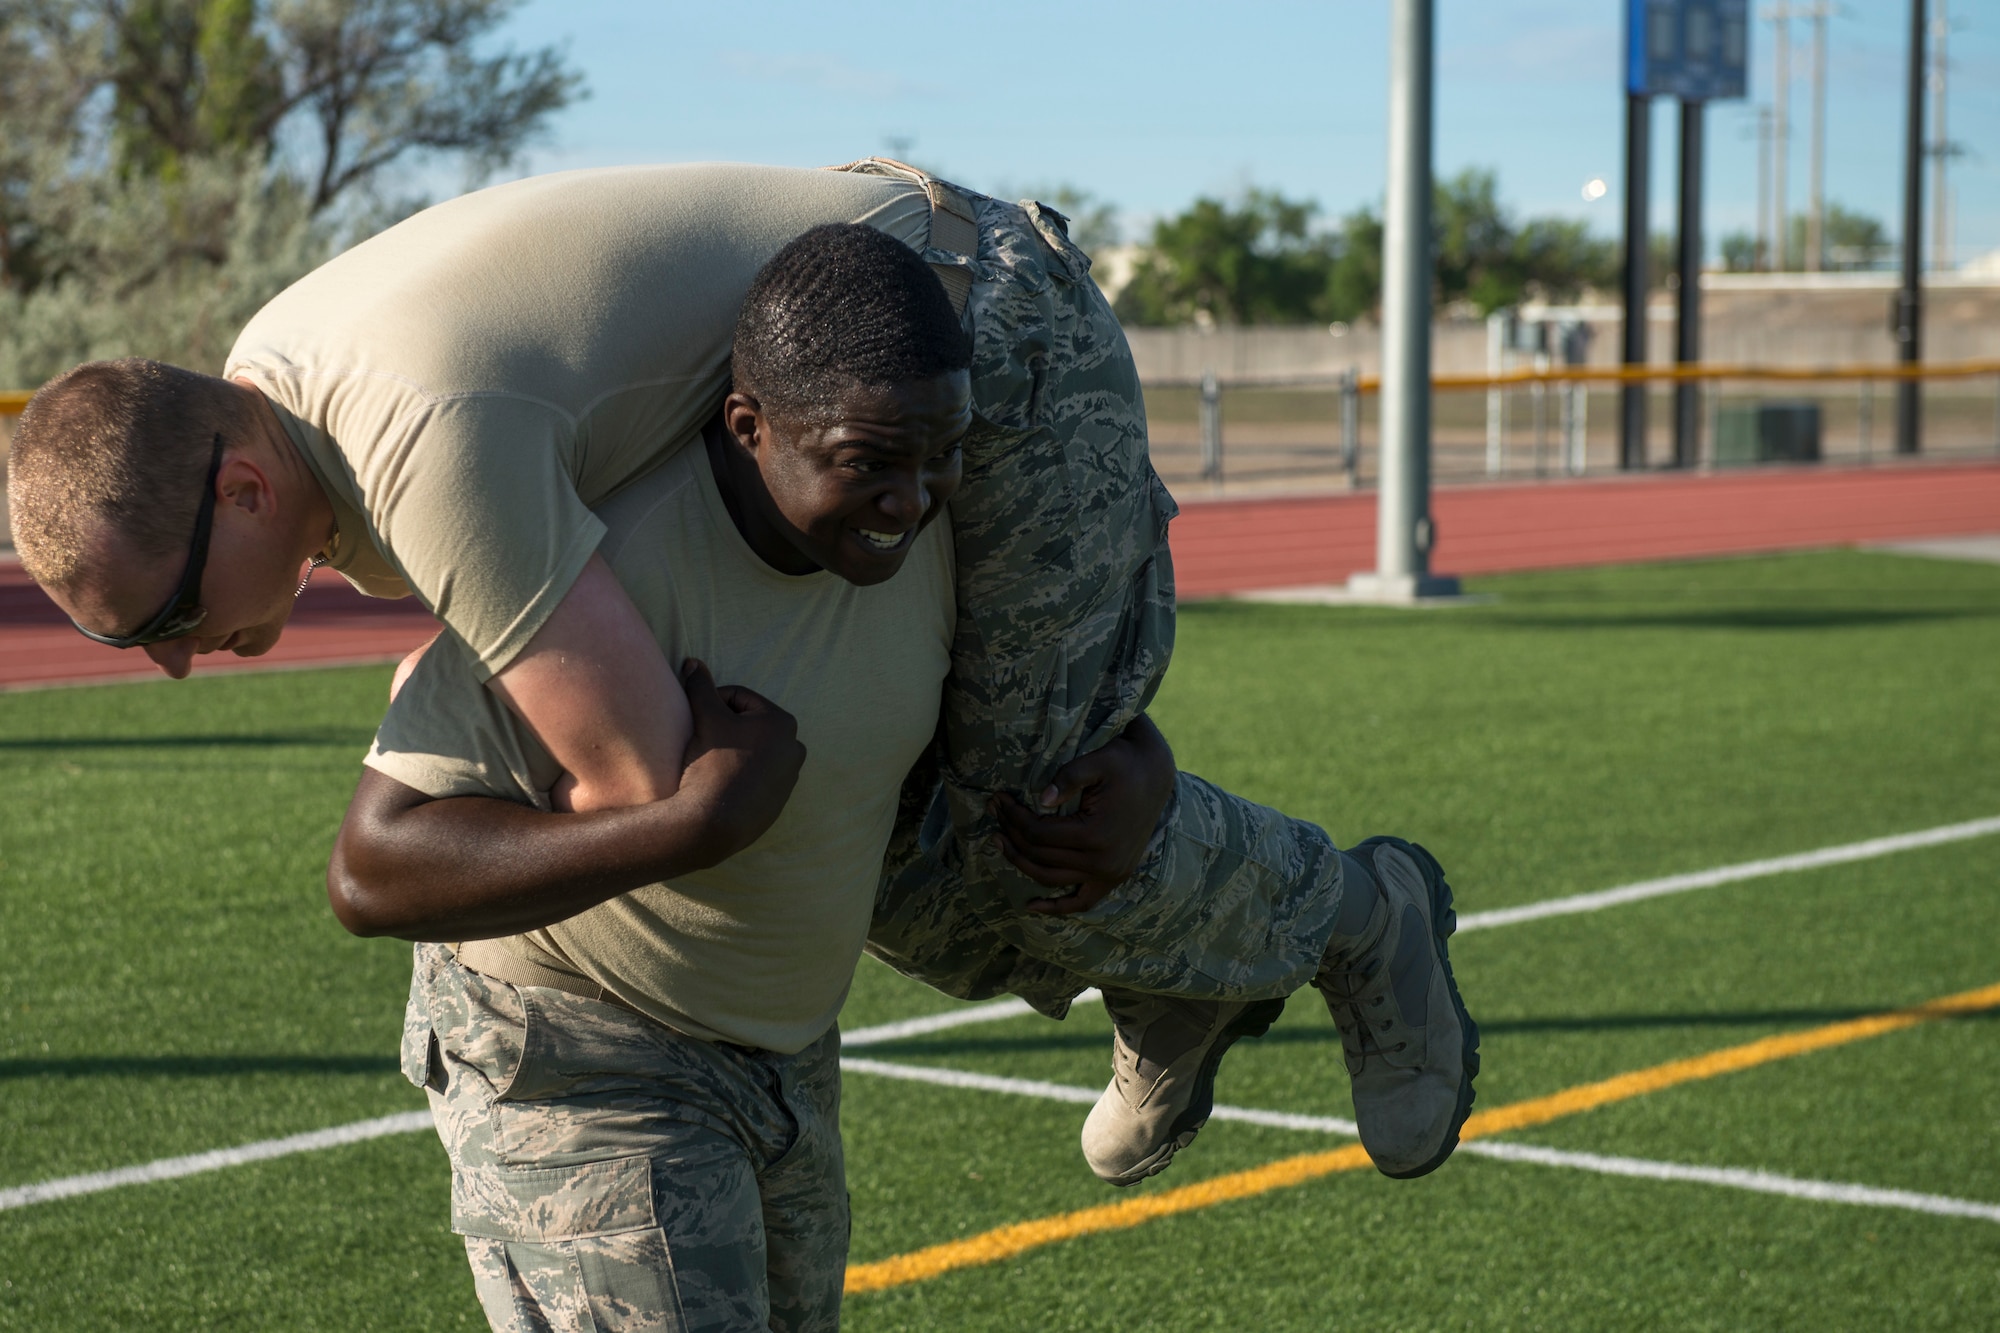 Airman 1st Class Anthony Ford and Senior Airman Steven Waller, 366th Security Forces Squadron response force members, perform a fireman’s carry during the National Police Week memorial workout, May 15, 2018, at Mountain Home Air Force Base, Idaho. The memorial workout included 14 workouts and 14 repetitions to honor the fallen defenders. (U.S. Air Force Photo by Airman 1st Class JaNae Capuno)